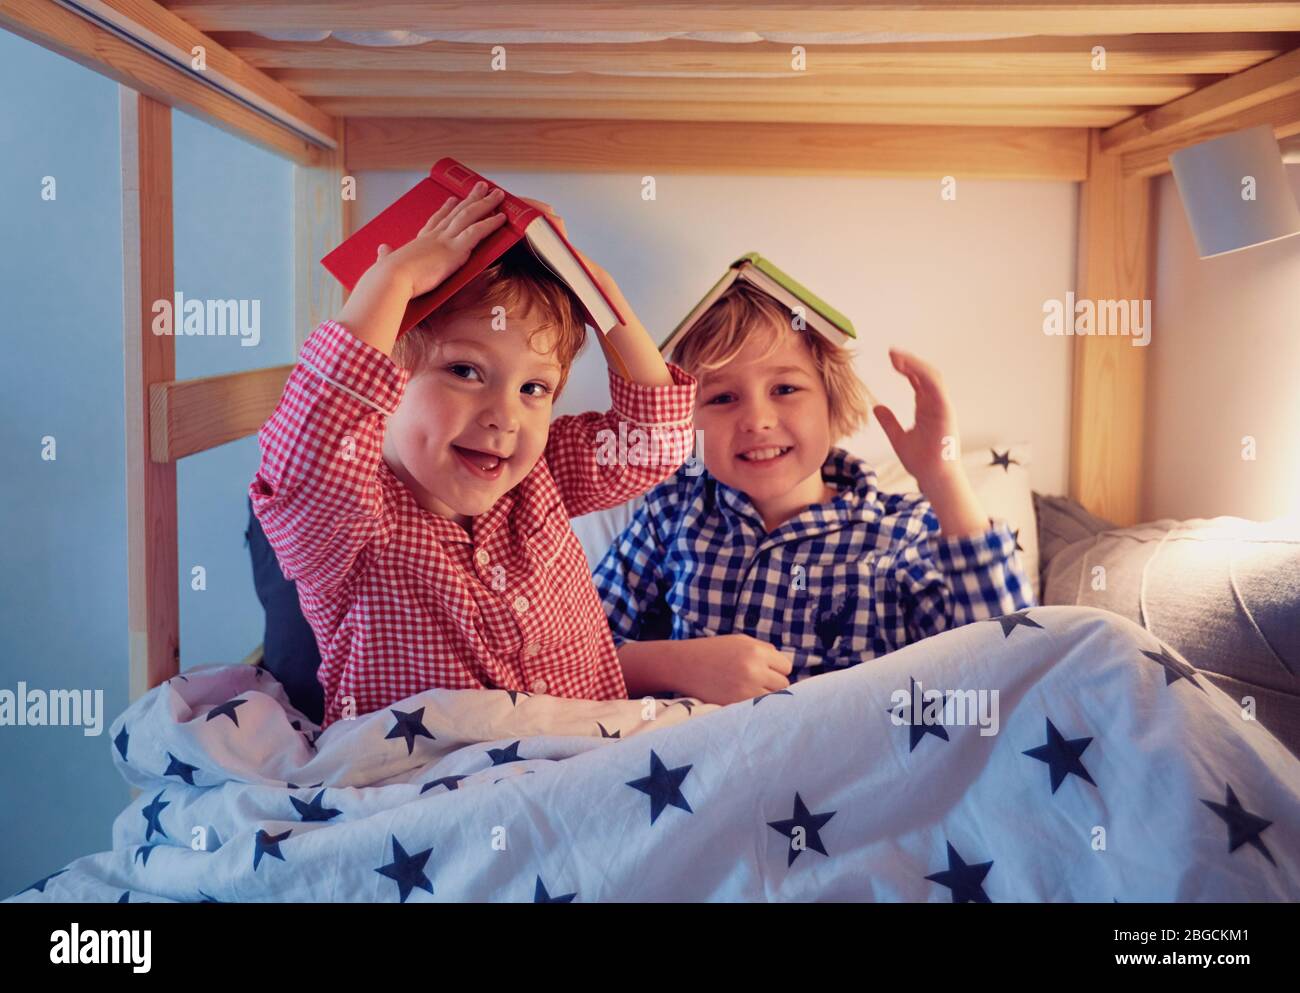 cheerful kids, brothers having fun, playing with books on the bunk bed during bedtime Stock Photo